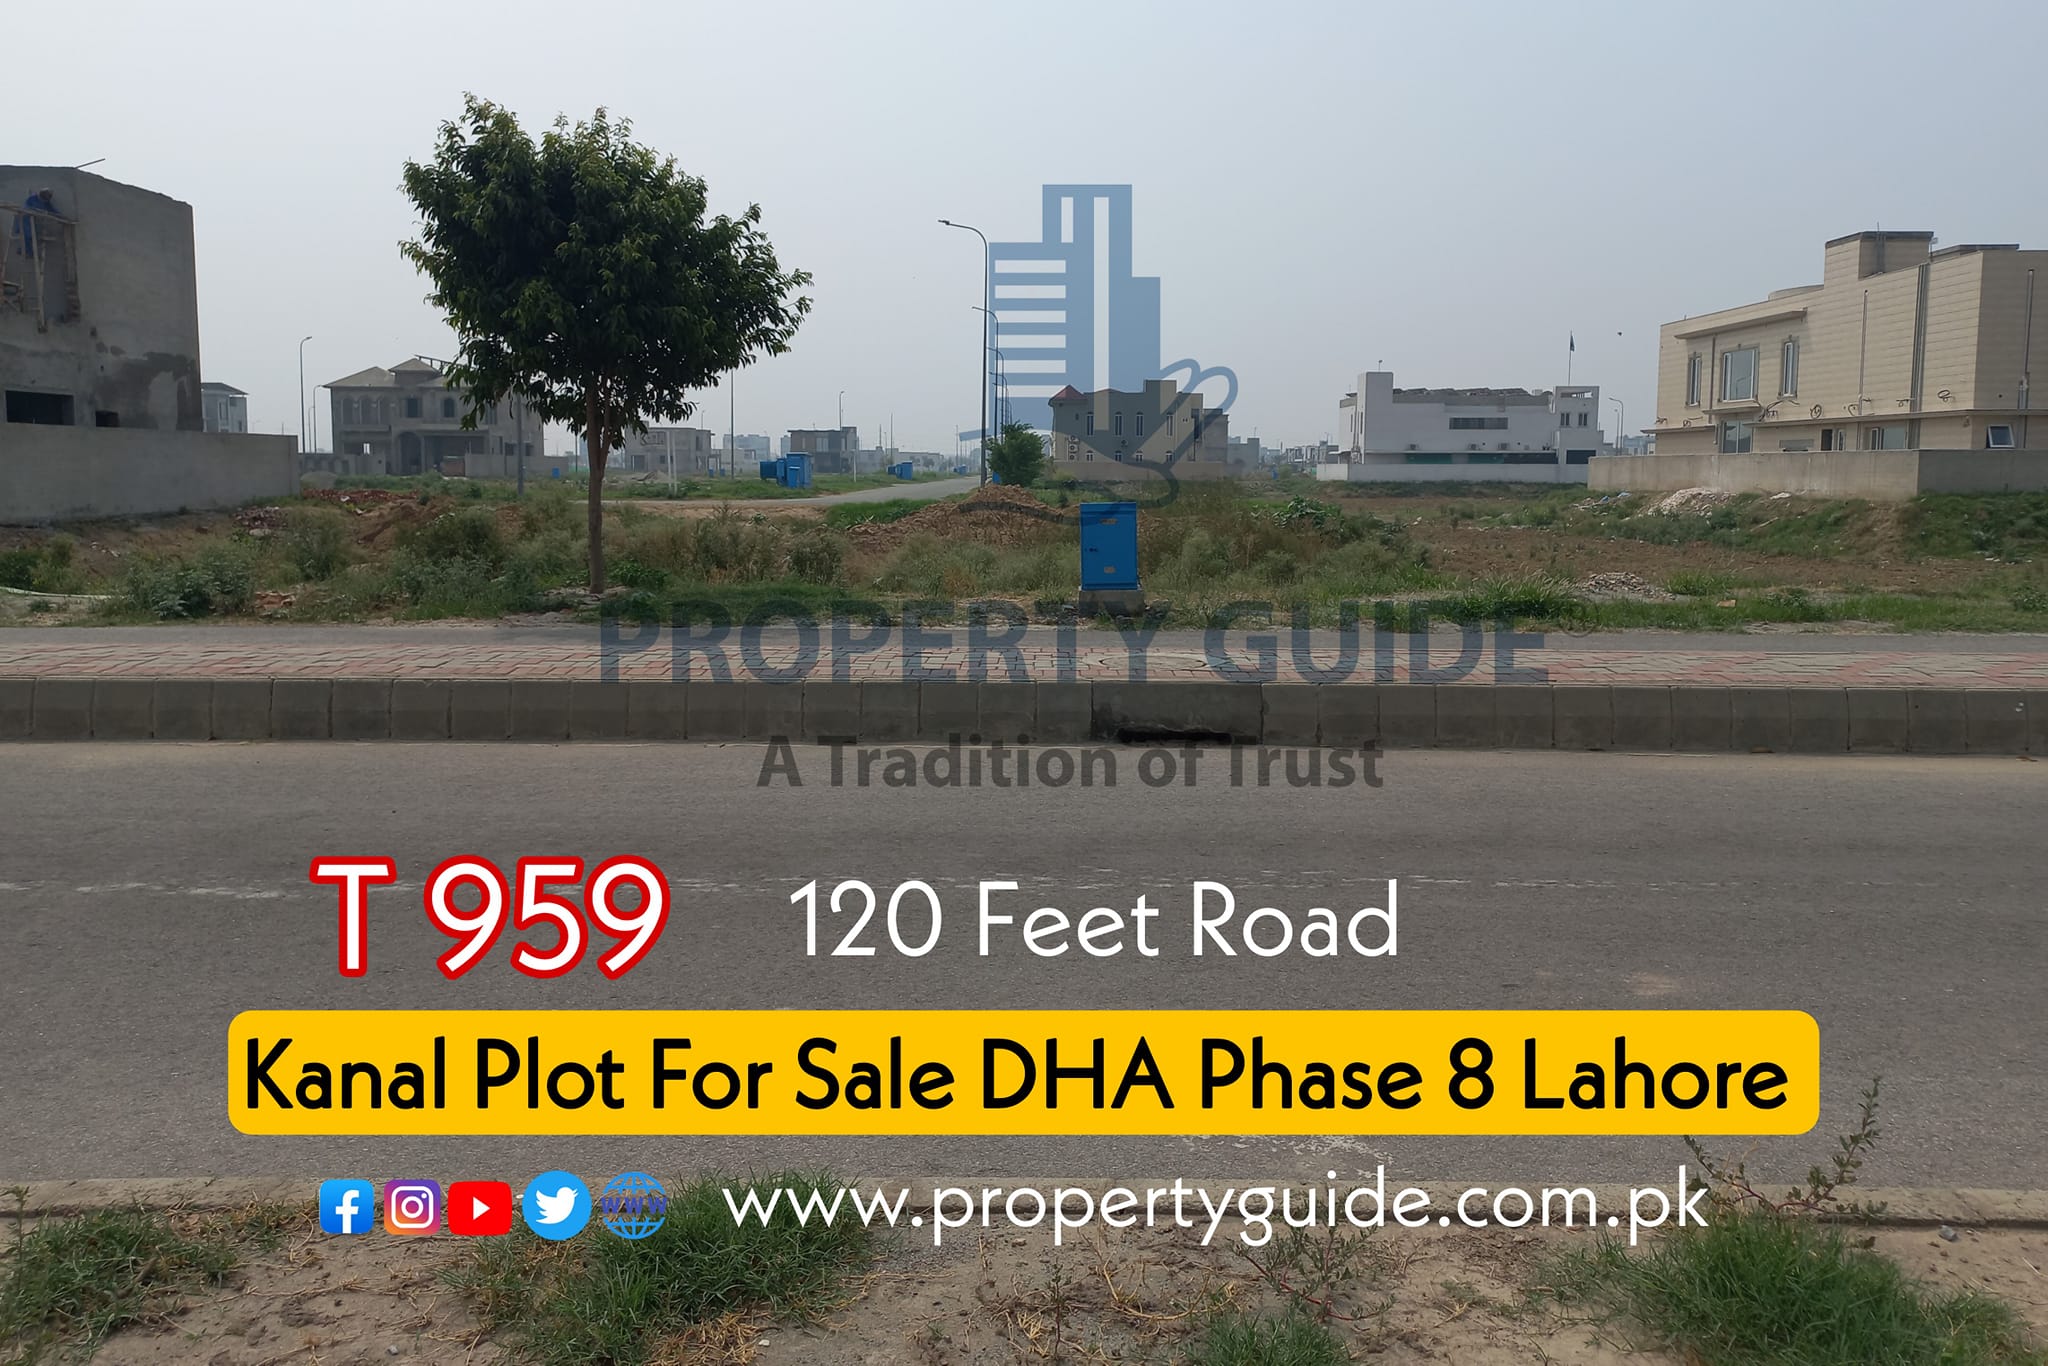 DHA Phase 8 Lahore Plot For Sale 120 Feet Road